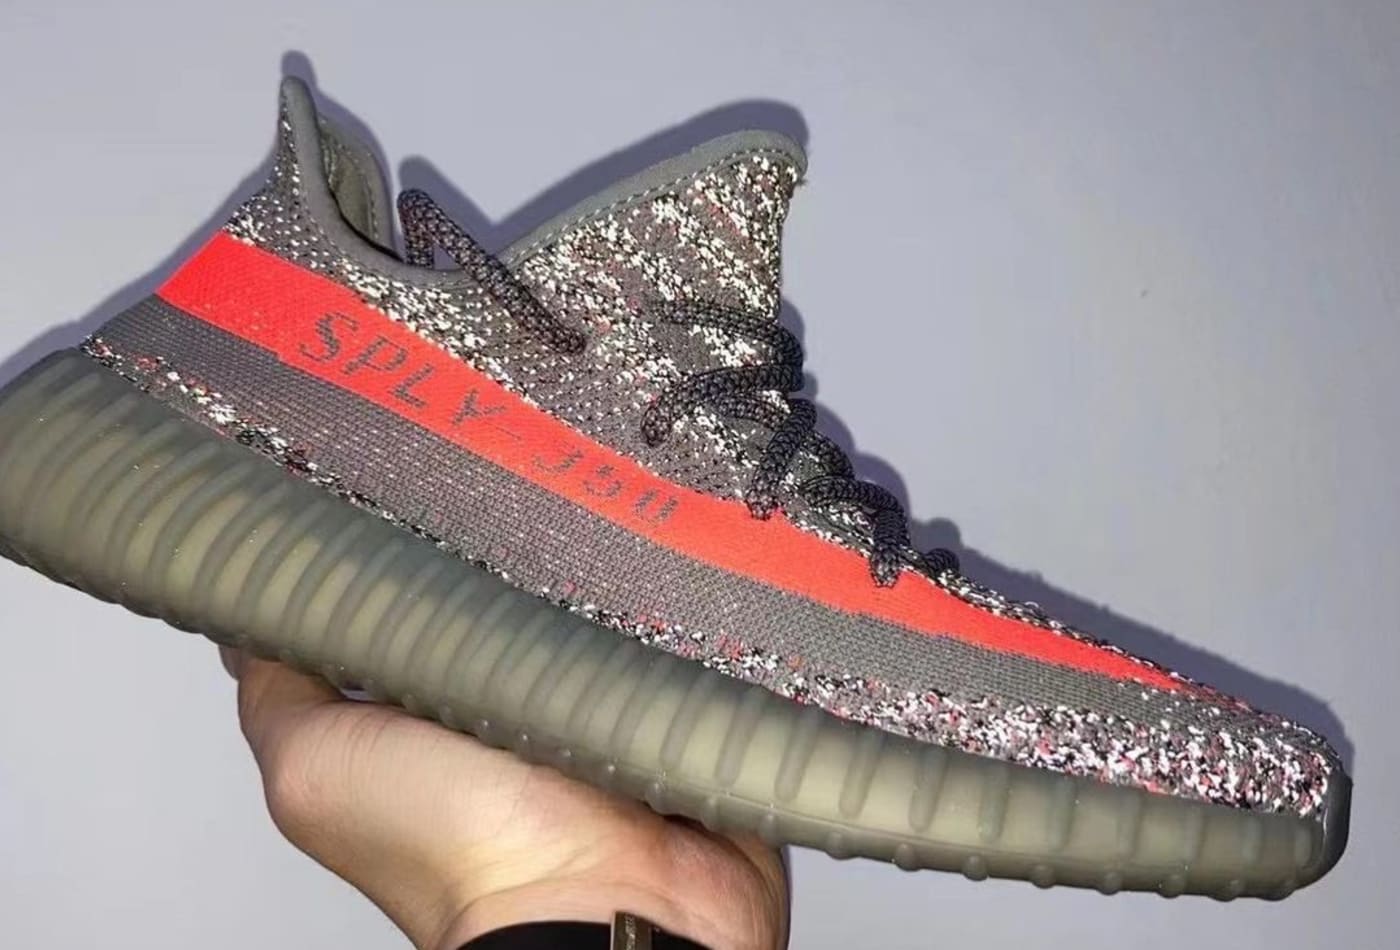 Adidas Yeezy Release Dates Upcoming Sneakers Guide | Complex